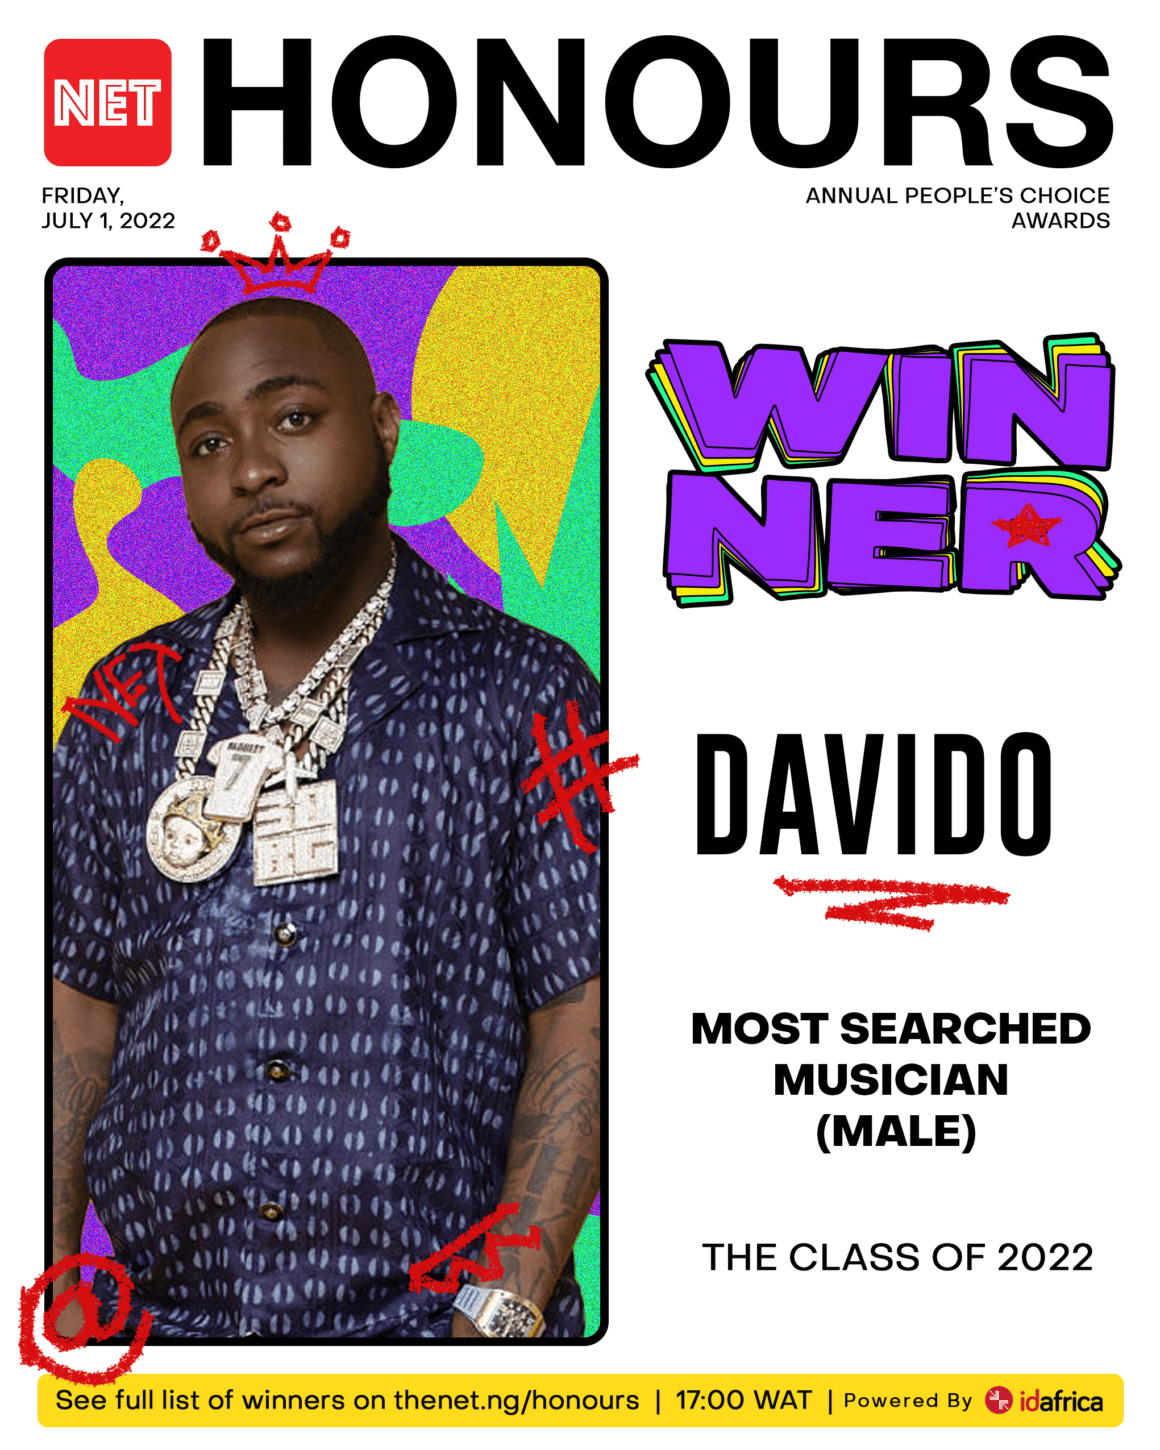 Davido beats Wizkid and Burna Boy to win Most Searched Male Musician Award for the third time in a row